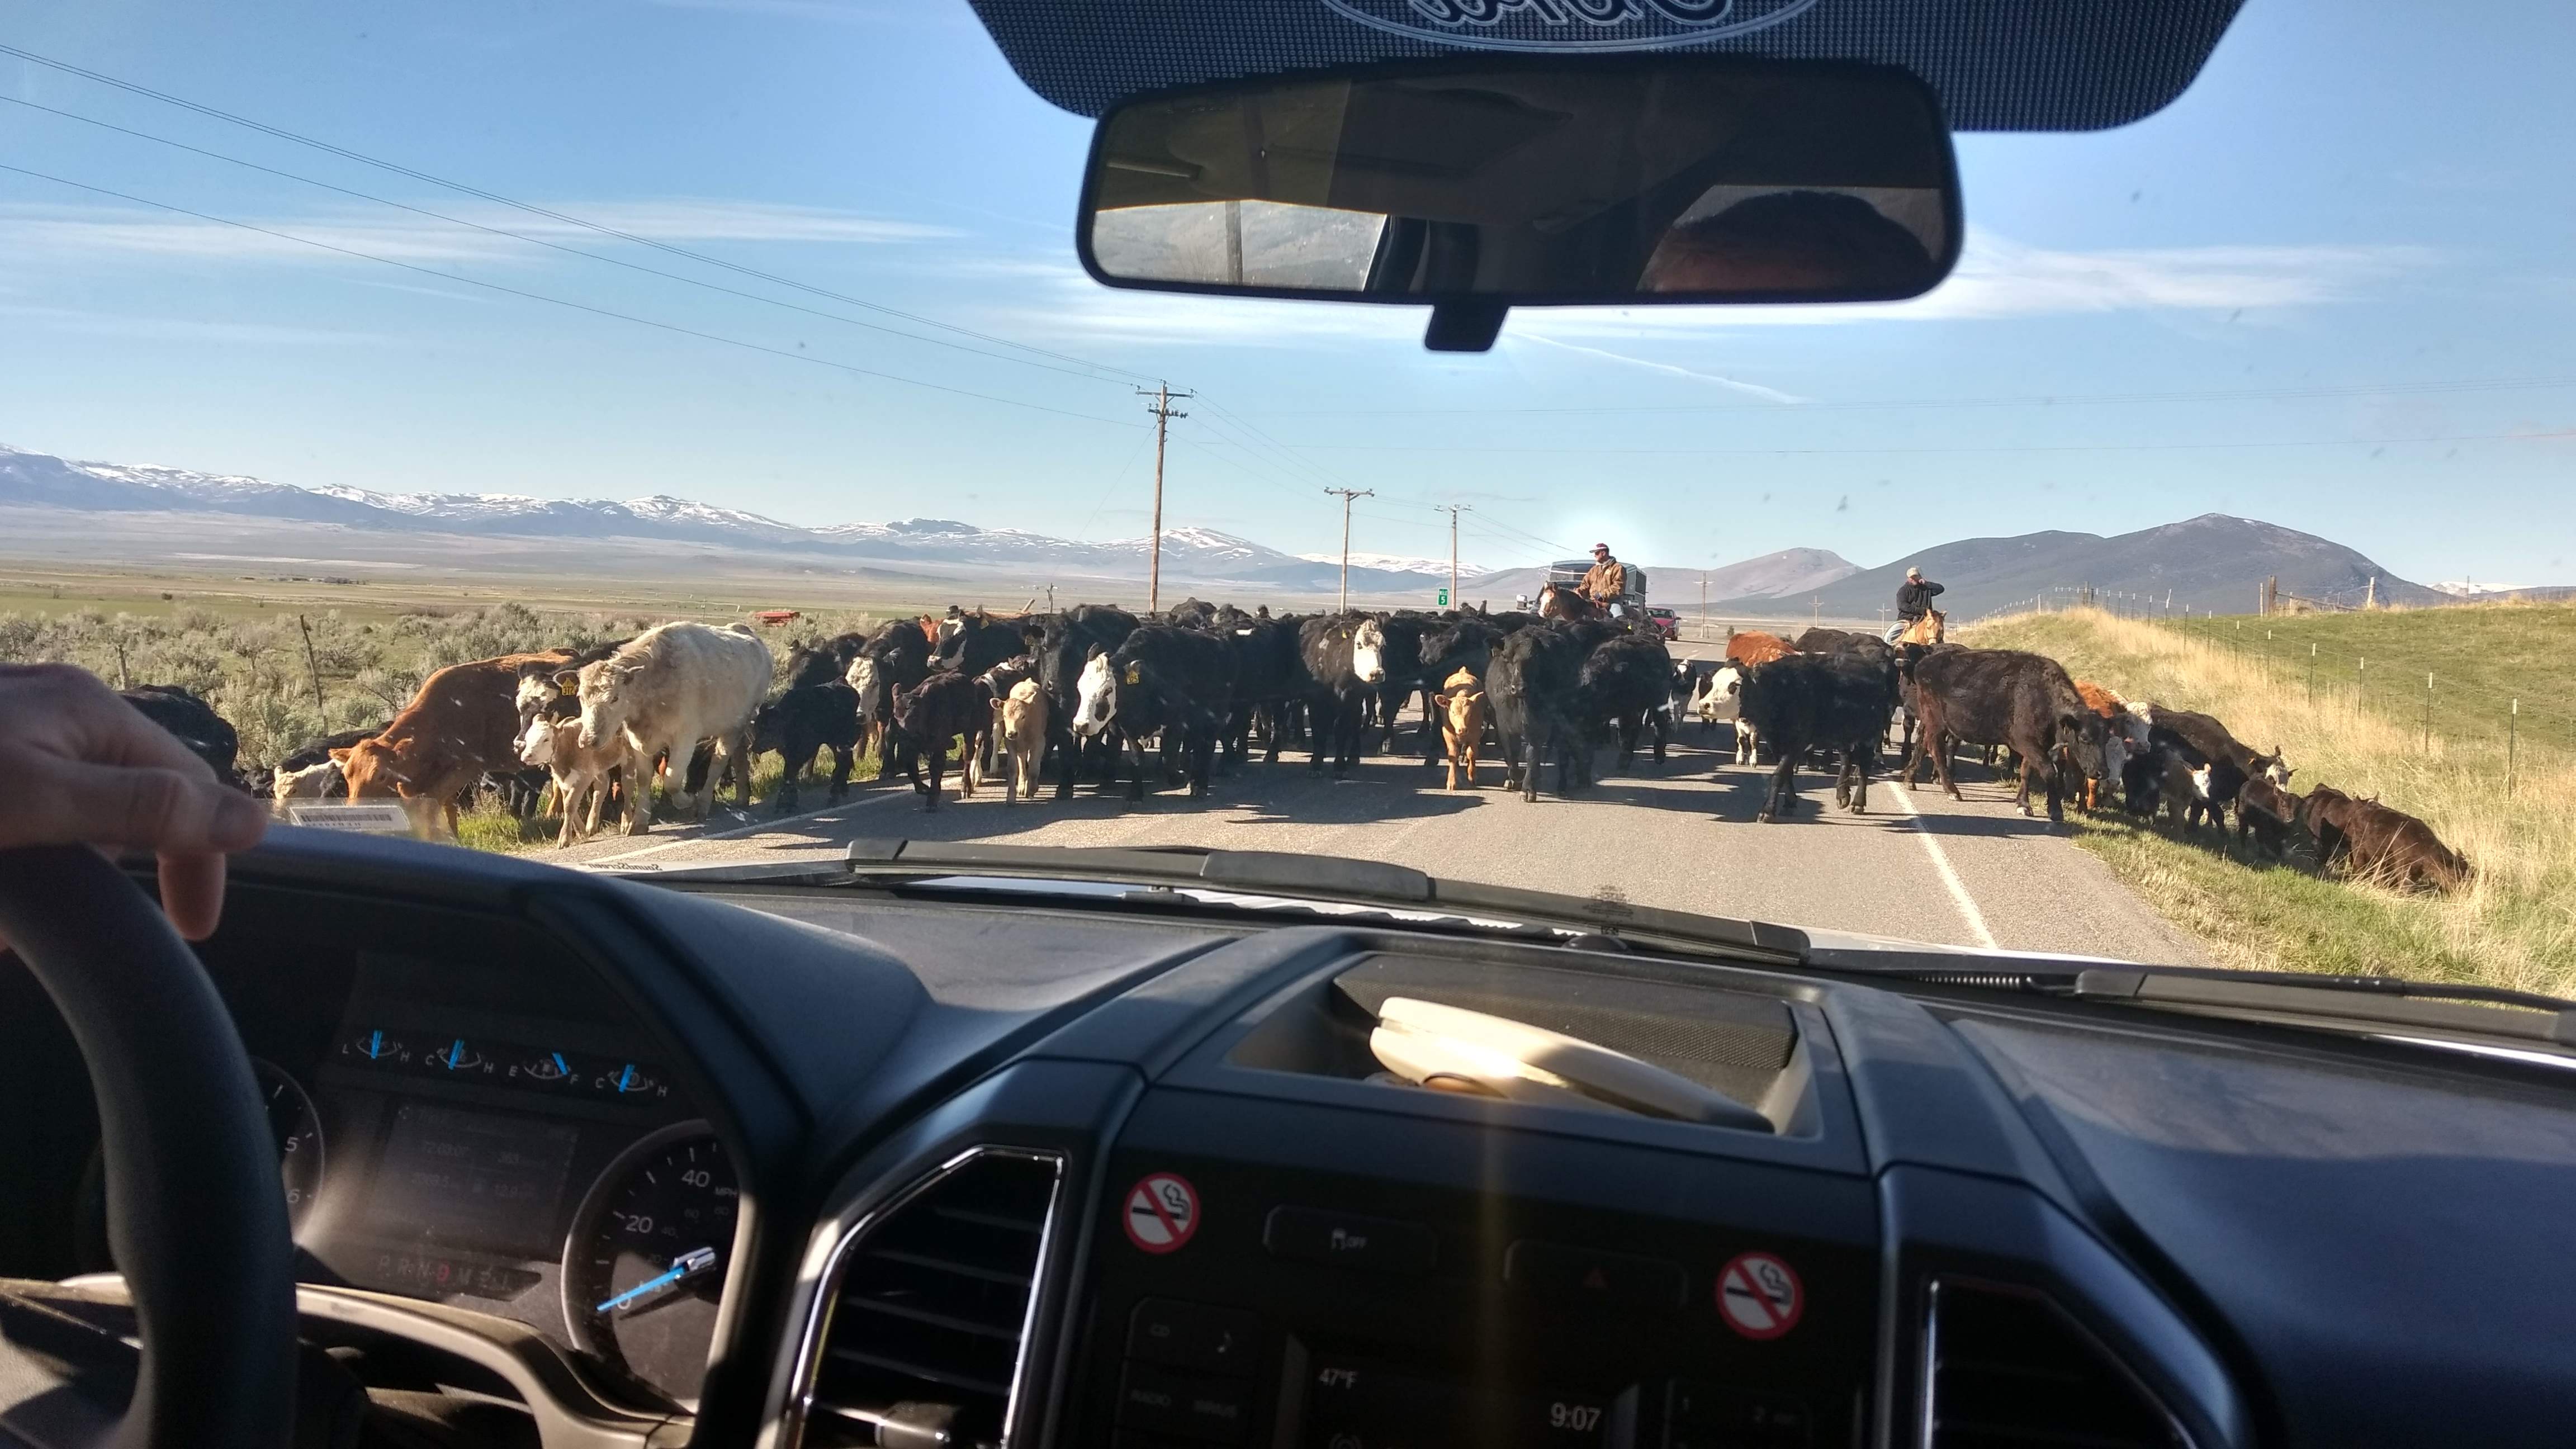 Idaho Ranchers Moving their Herd on the Highway, May 2017